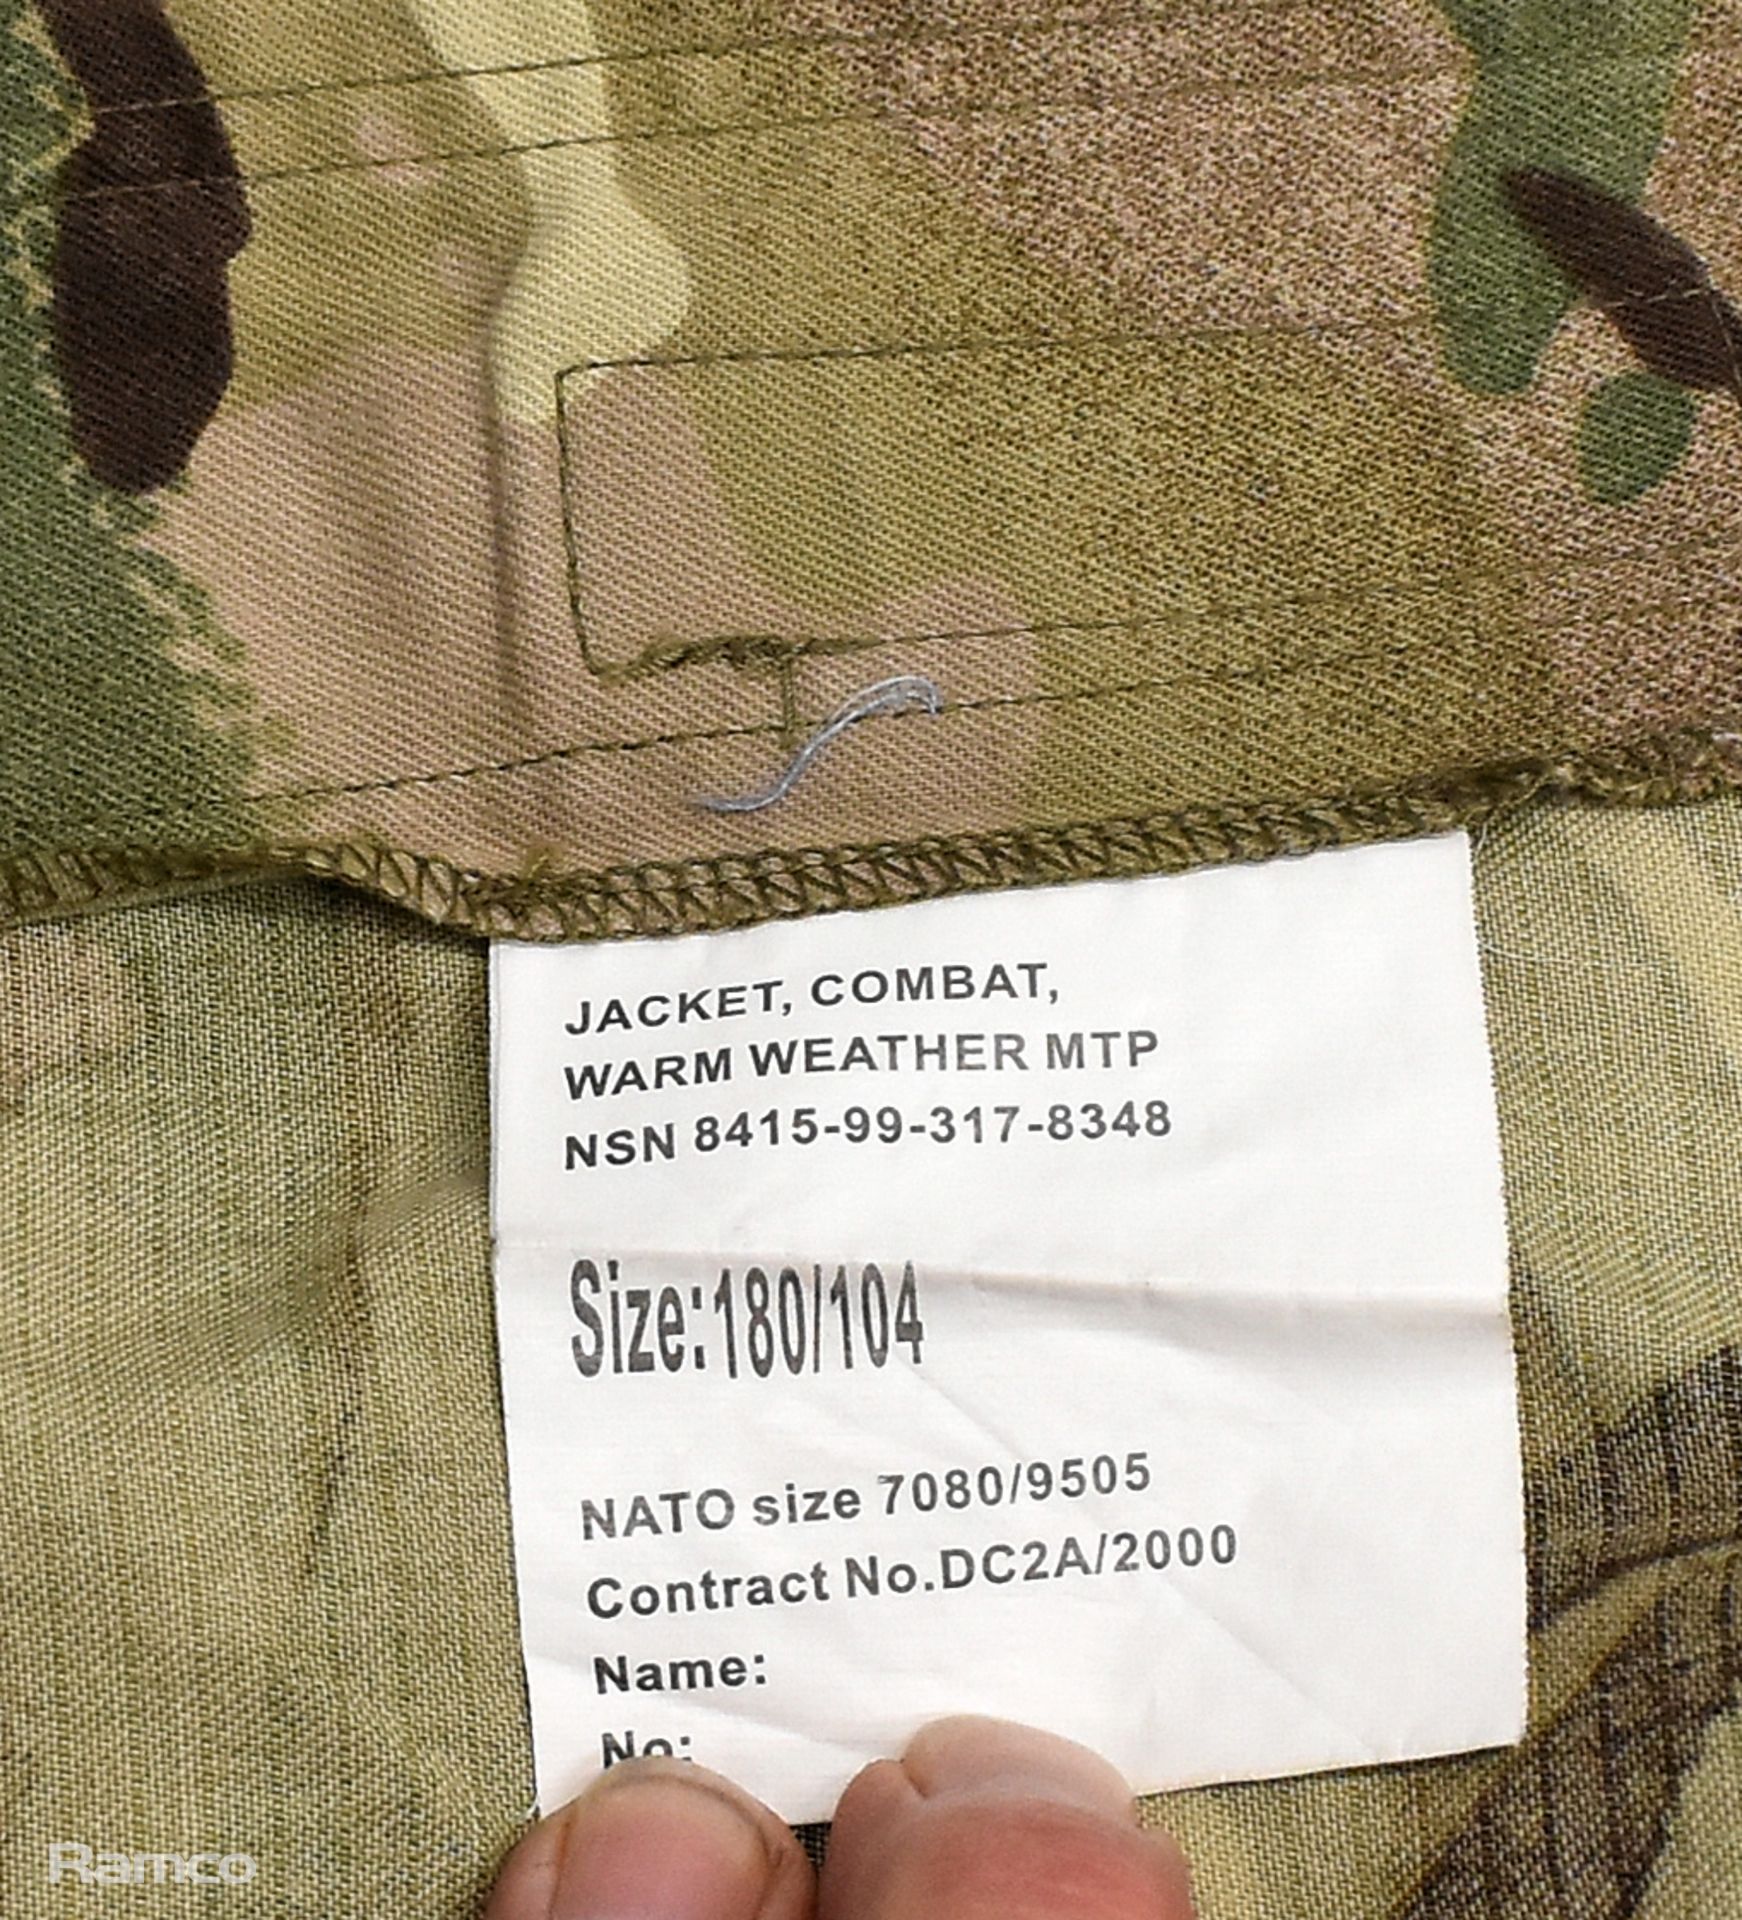 60x British Army MTP combat jackets warm weather - mixed grades and sizes - Image 5 of 7